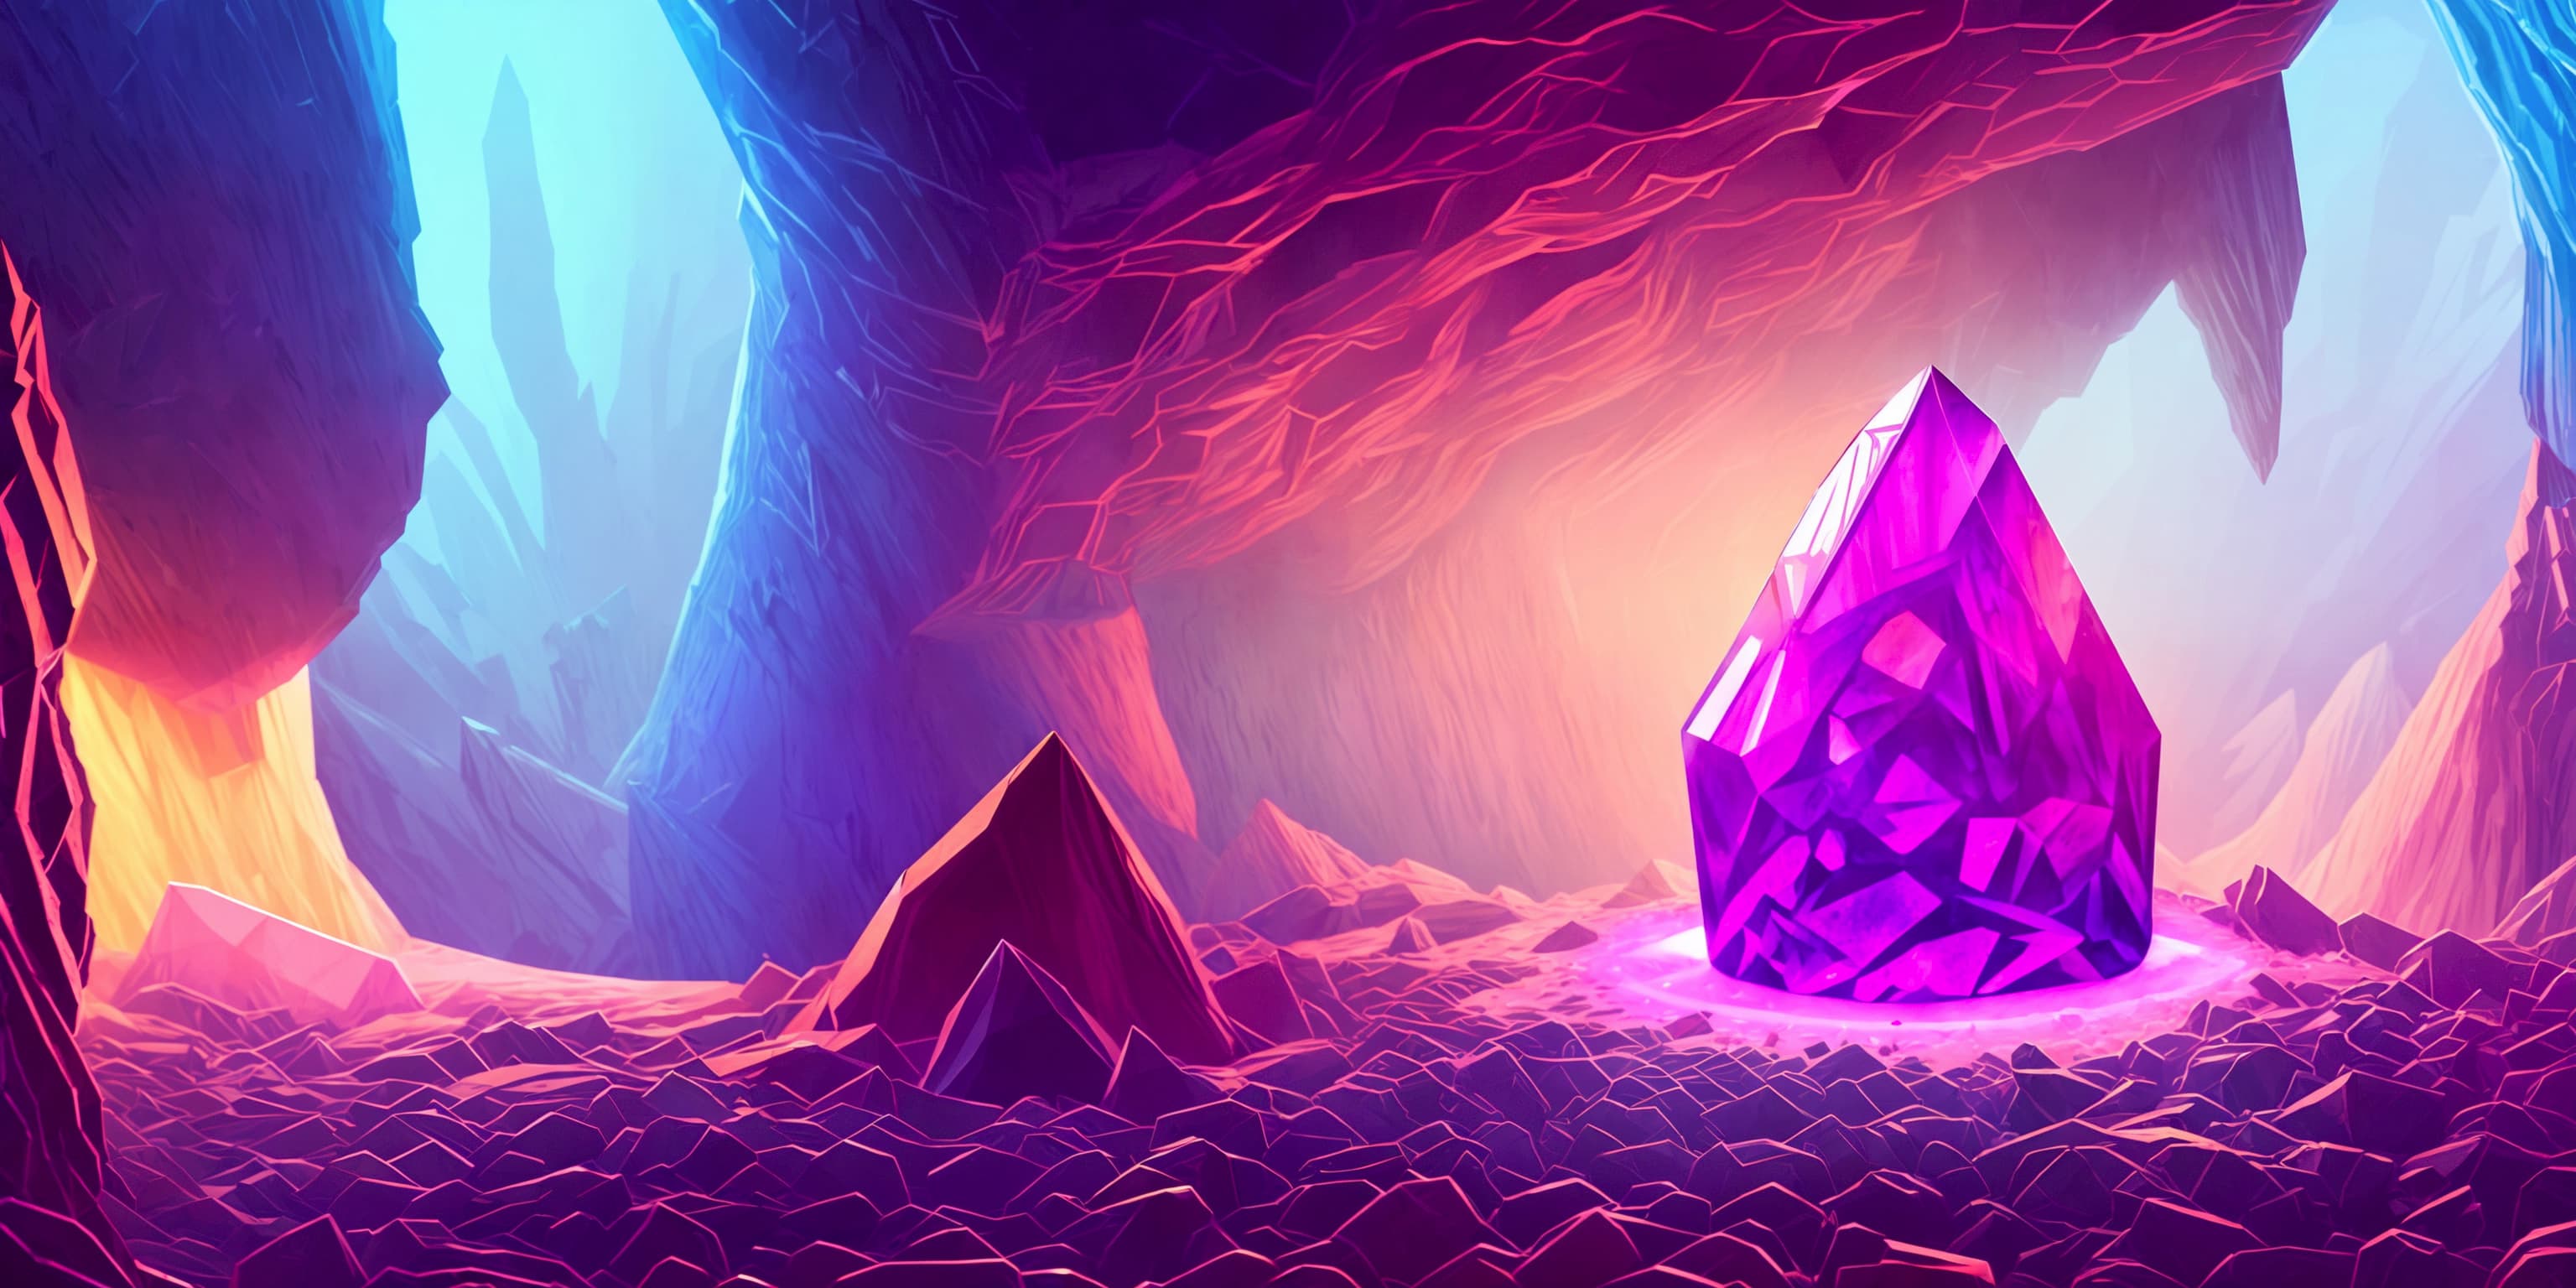 Illustration of a large pink glowing crystal in a cave system.